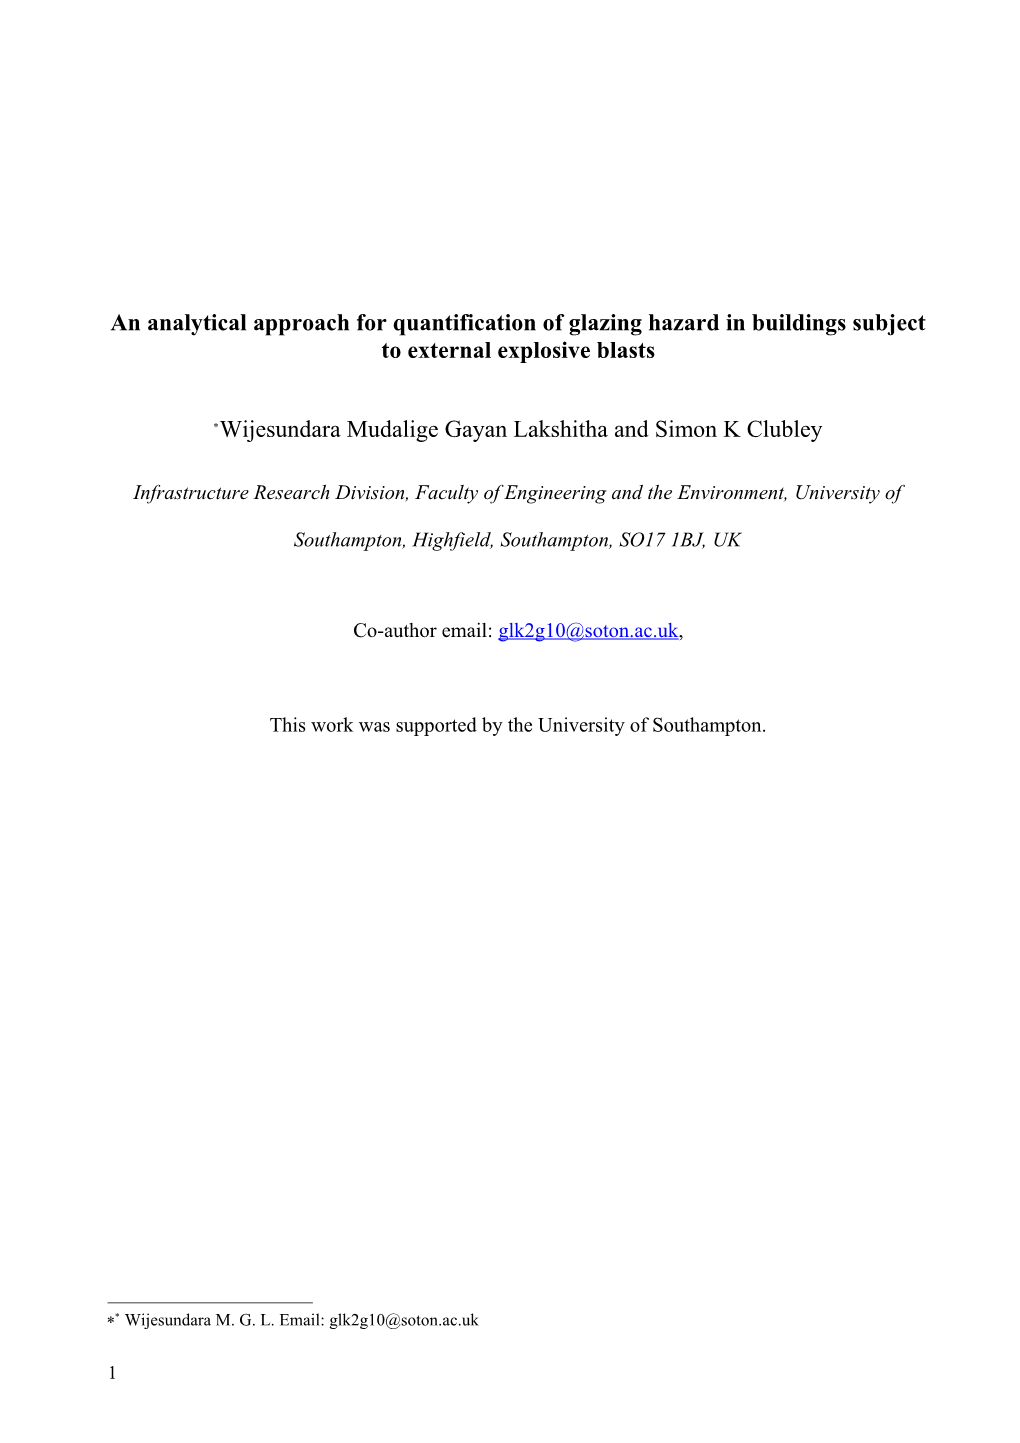 An Analytical Approach for Quantification of Glazing Hazard in Buildings Subject to External